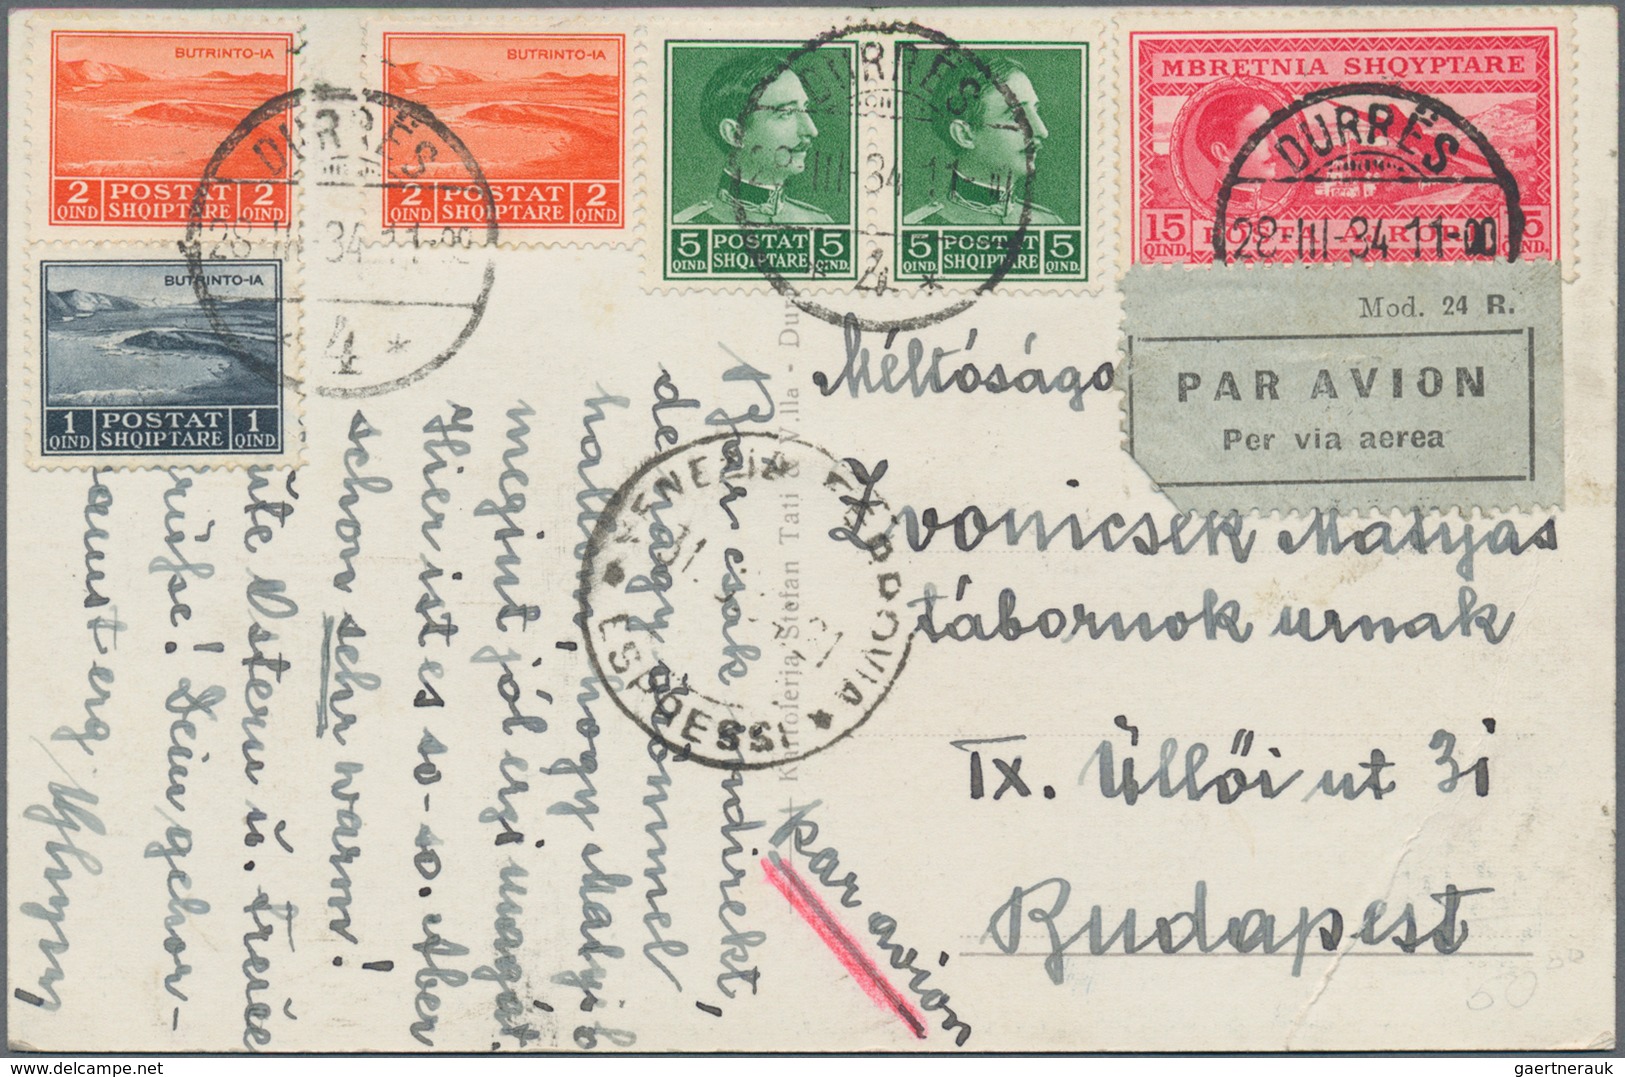 Europa - Ost: 1890/1960 (ca.), comprehensive holding of covers/cards, comprising Bulgaria, Romania,